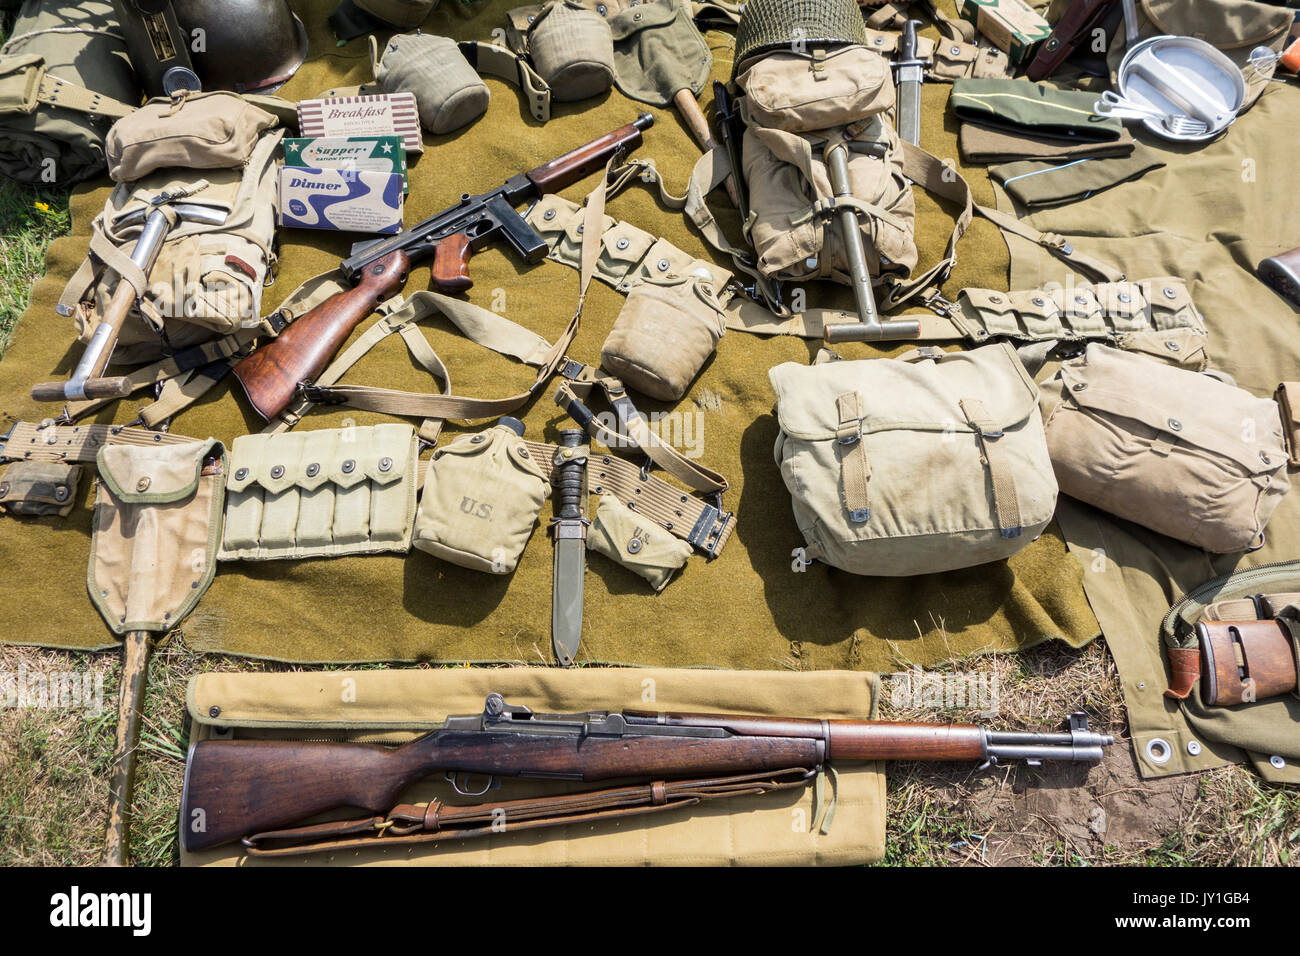 WW2 US soldier outfit and weapons displayed on the ground at World War Two militaria fair showing M1 Garand rifle and Thompson submachine gun Stock Photo